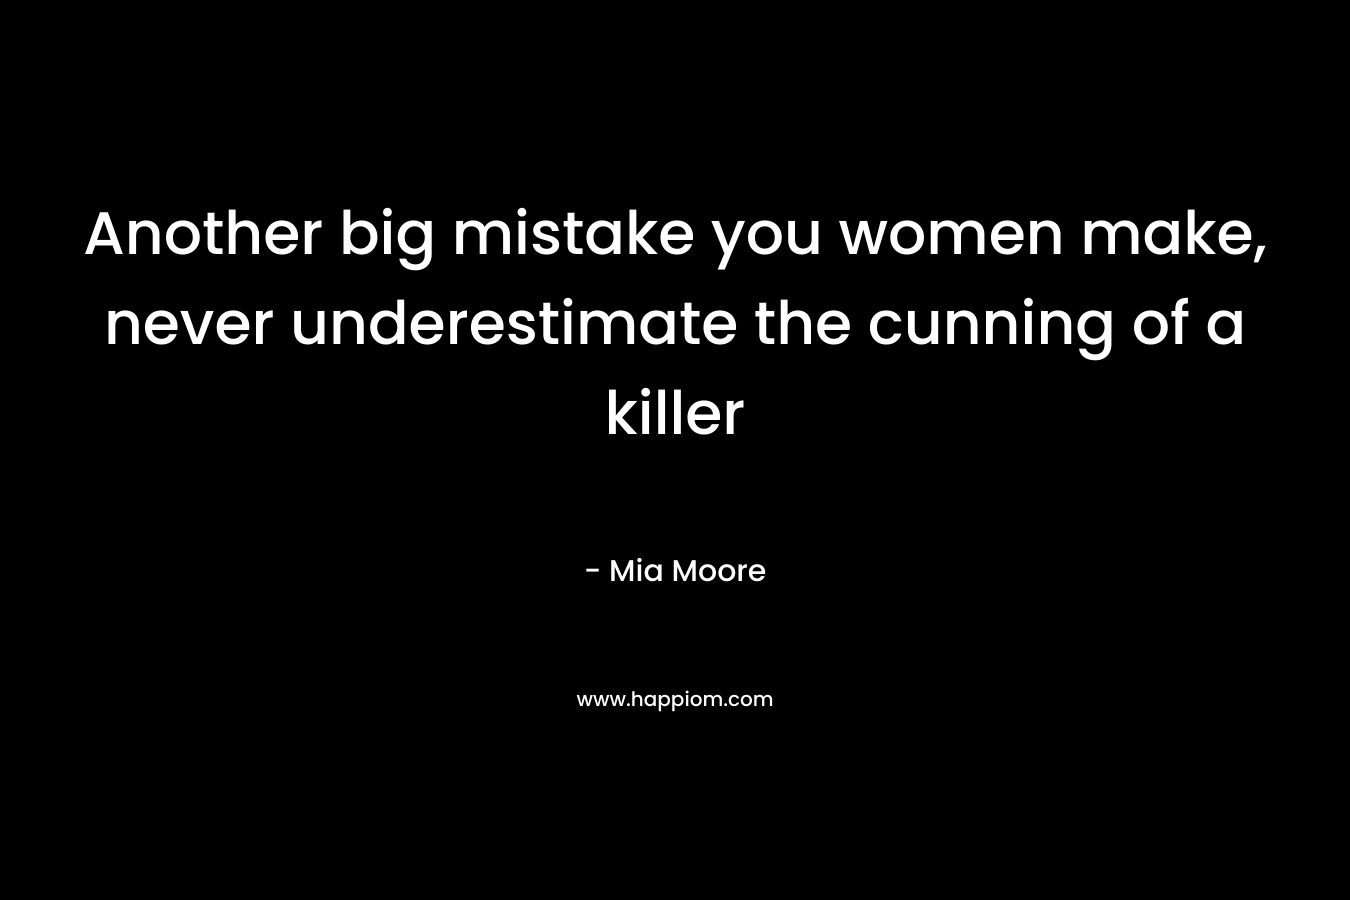 Another big mistake you women make, never underestimate the cunning of a killer